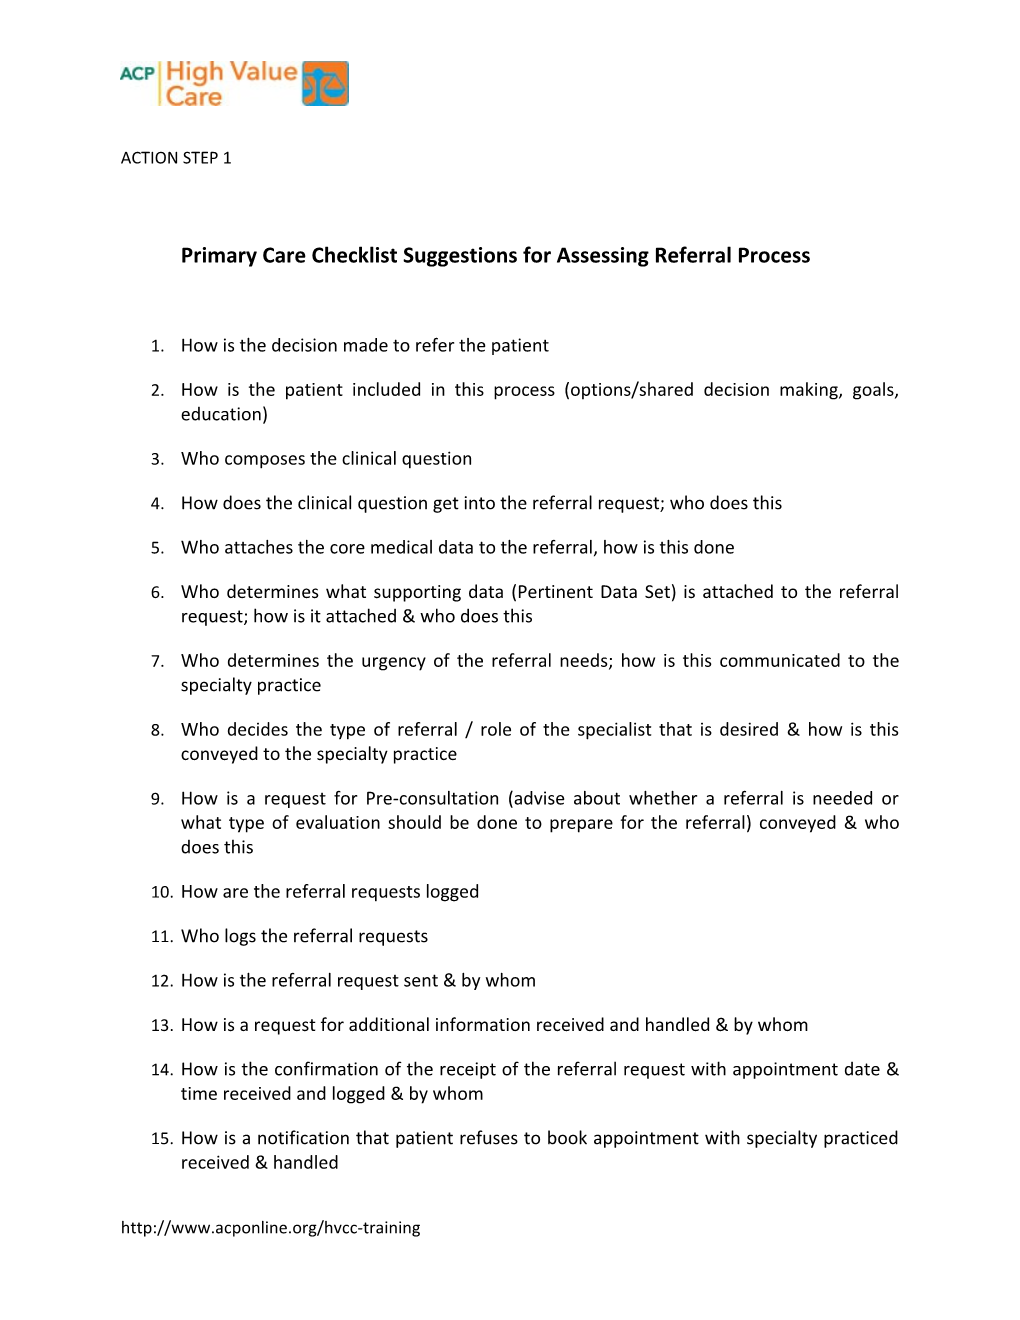 Primary Care Checklist Suggestions for Assessing Referral Process